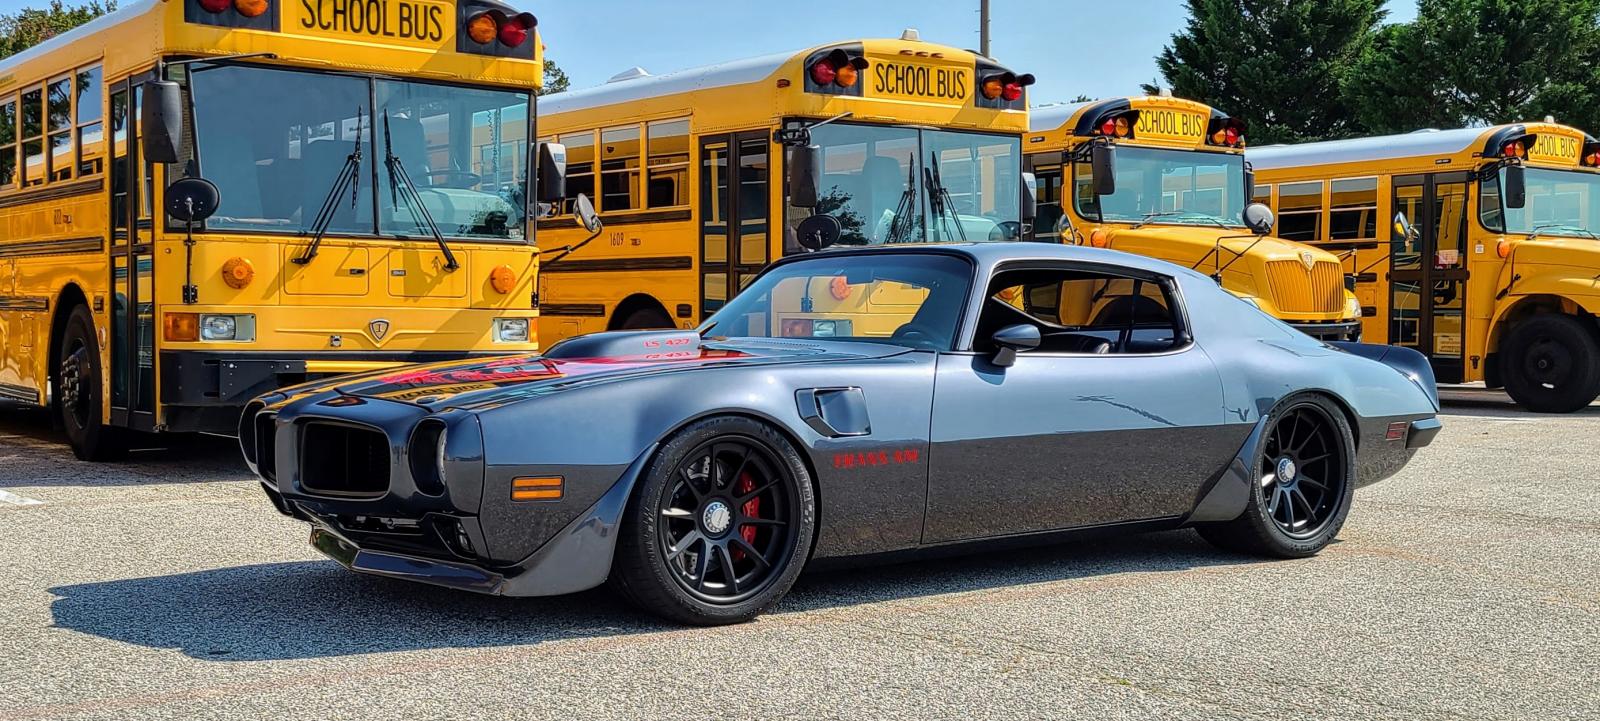 Name:  trans am and buses.jpg
Views: 810
Size:  272.8 KB